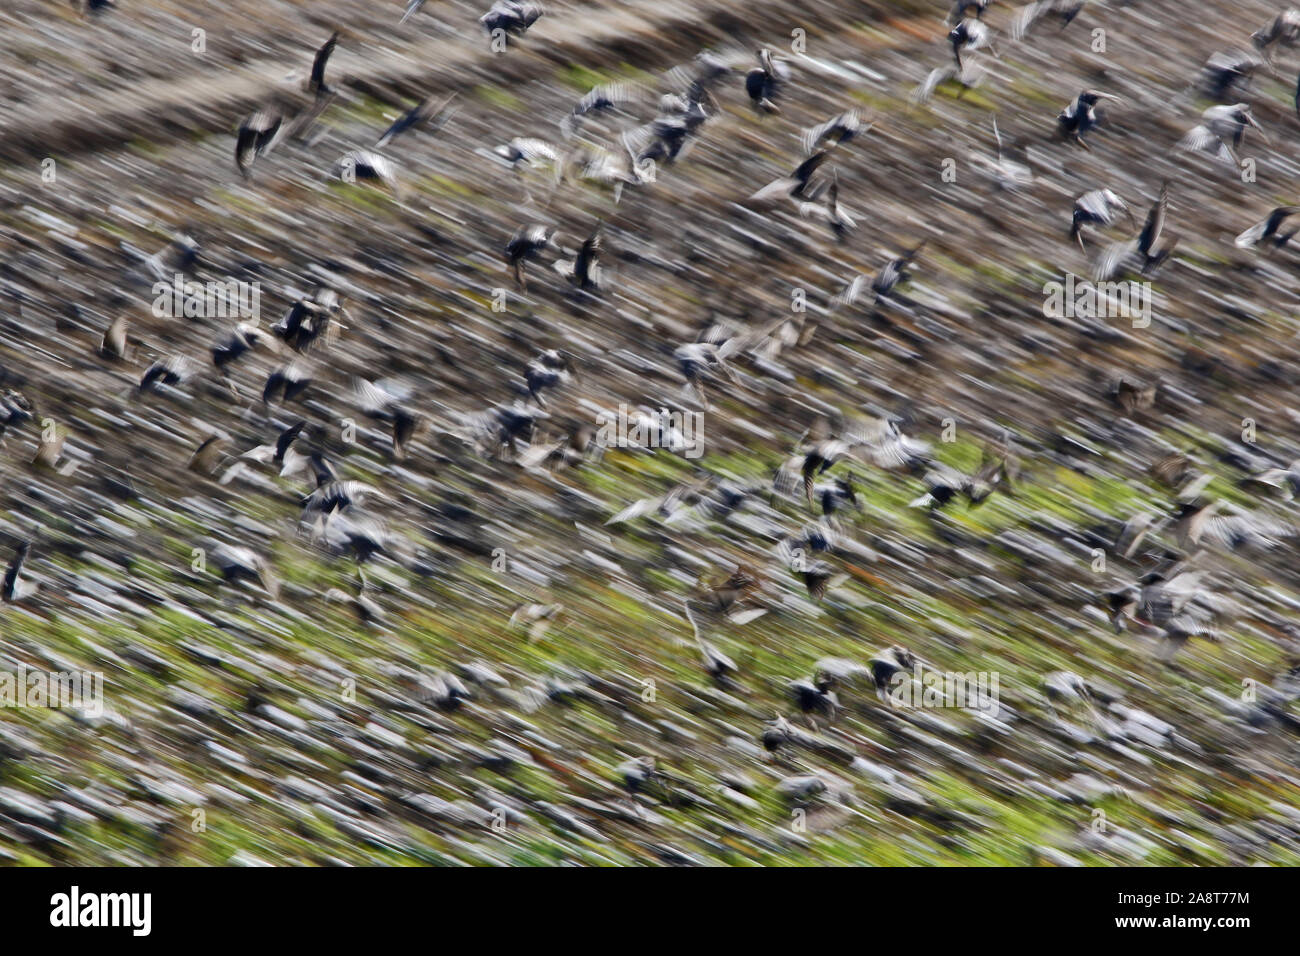 abstract art shot as if inside an enormous flock or murmuration of starlings Latin sturnus vulgaris flying together above a field in rural Italy Stock Photo